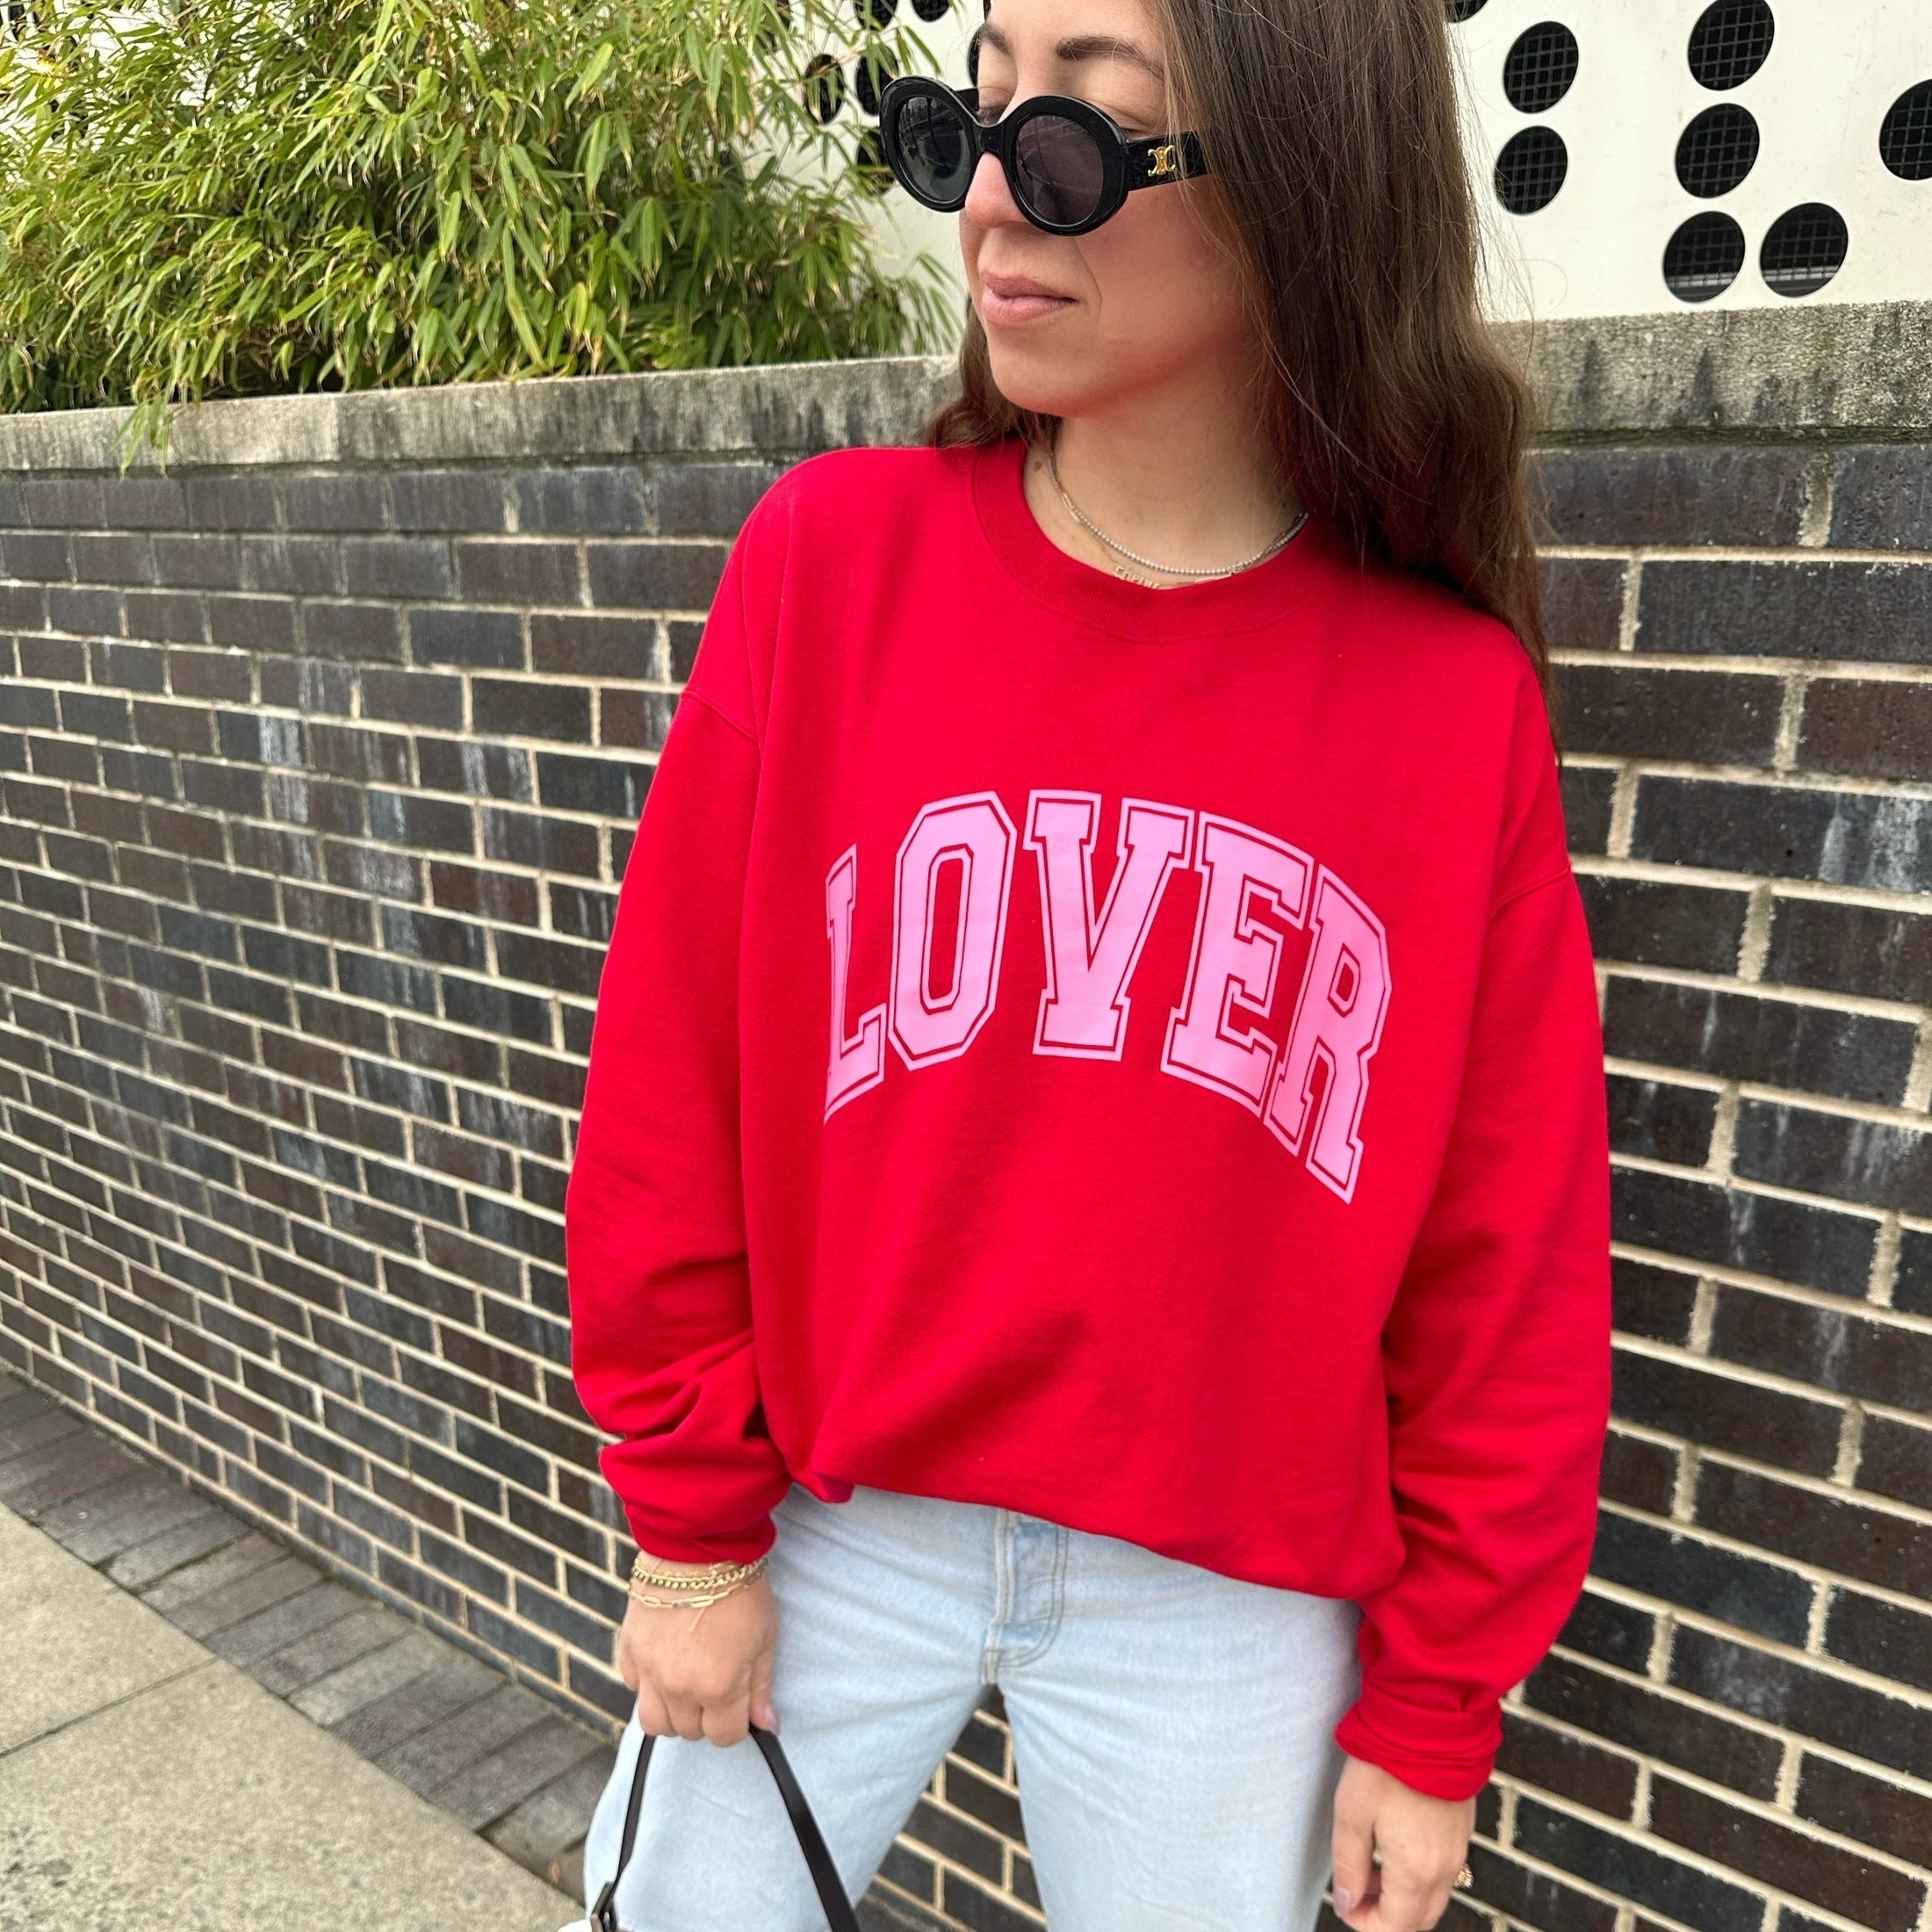 a model wearing a red sweatshirt that says 